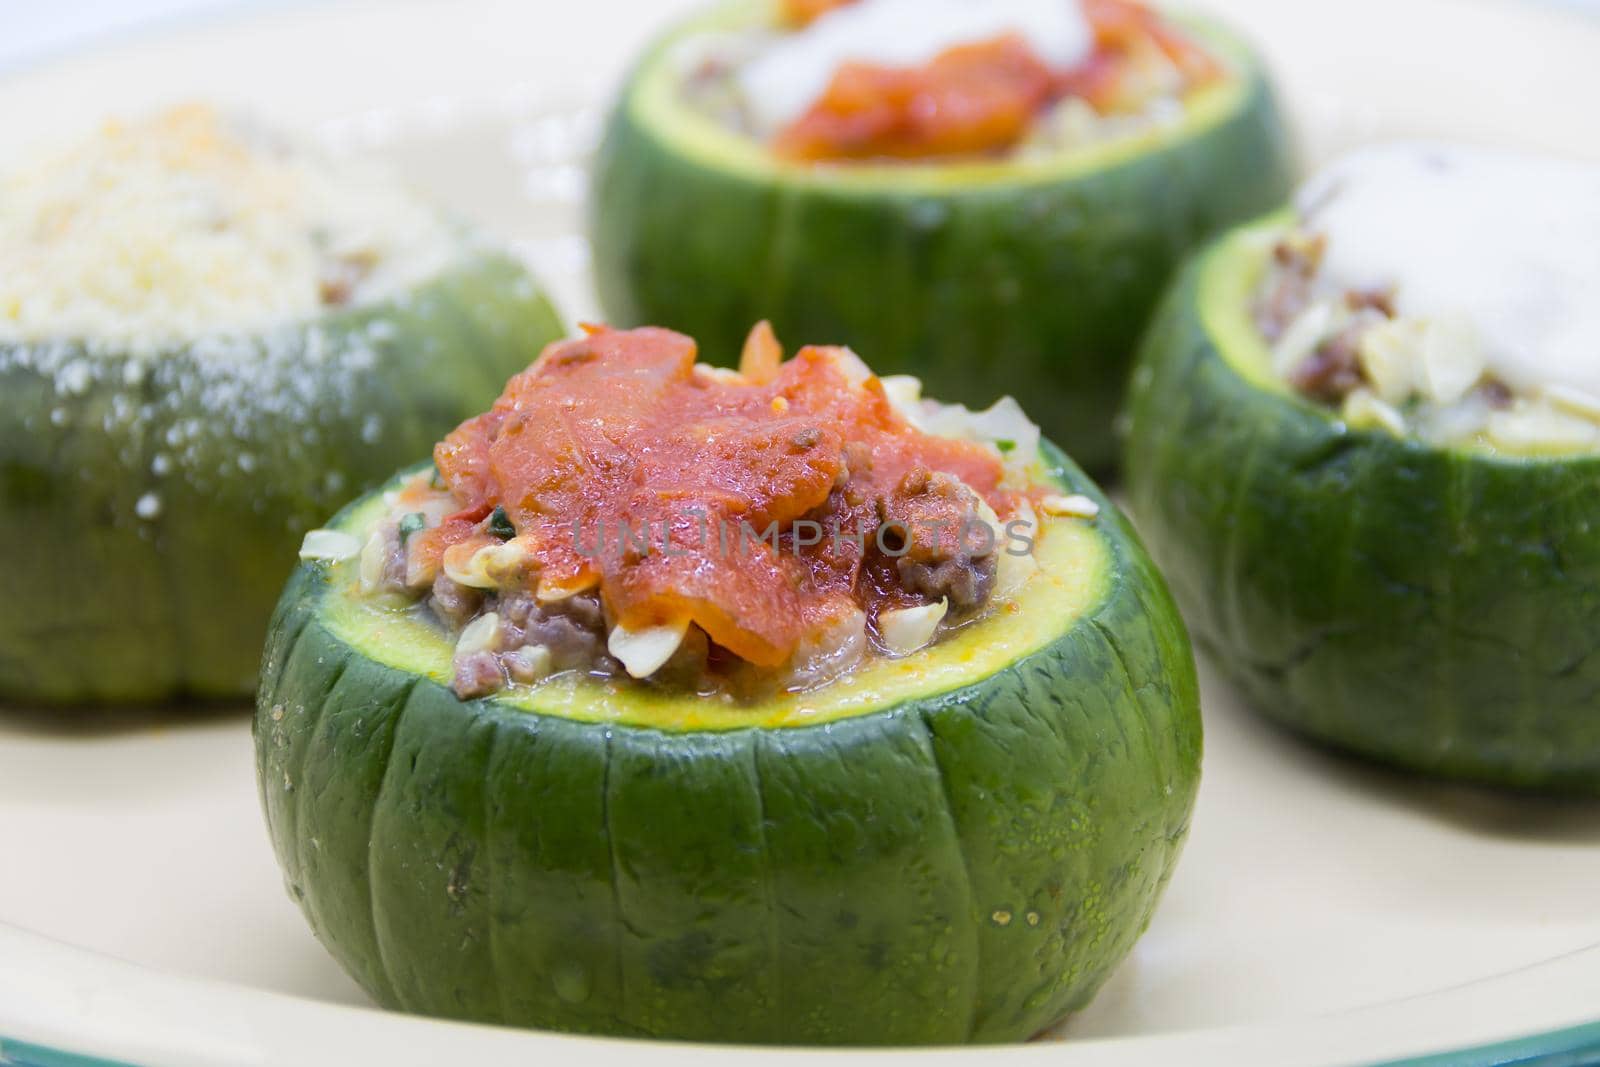 zucchini stuffed with meat and a variety of sauces by GabrielaBertolini